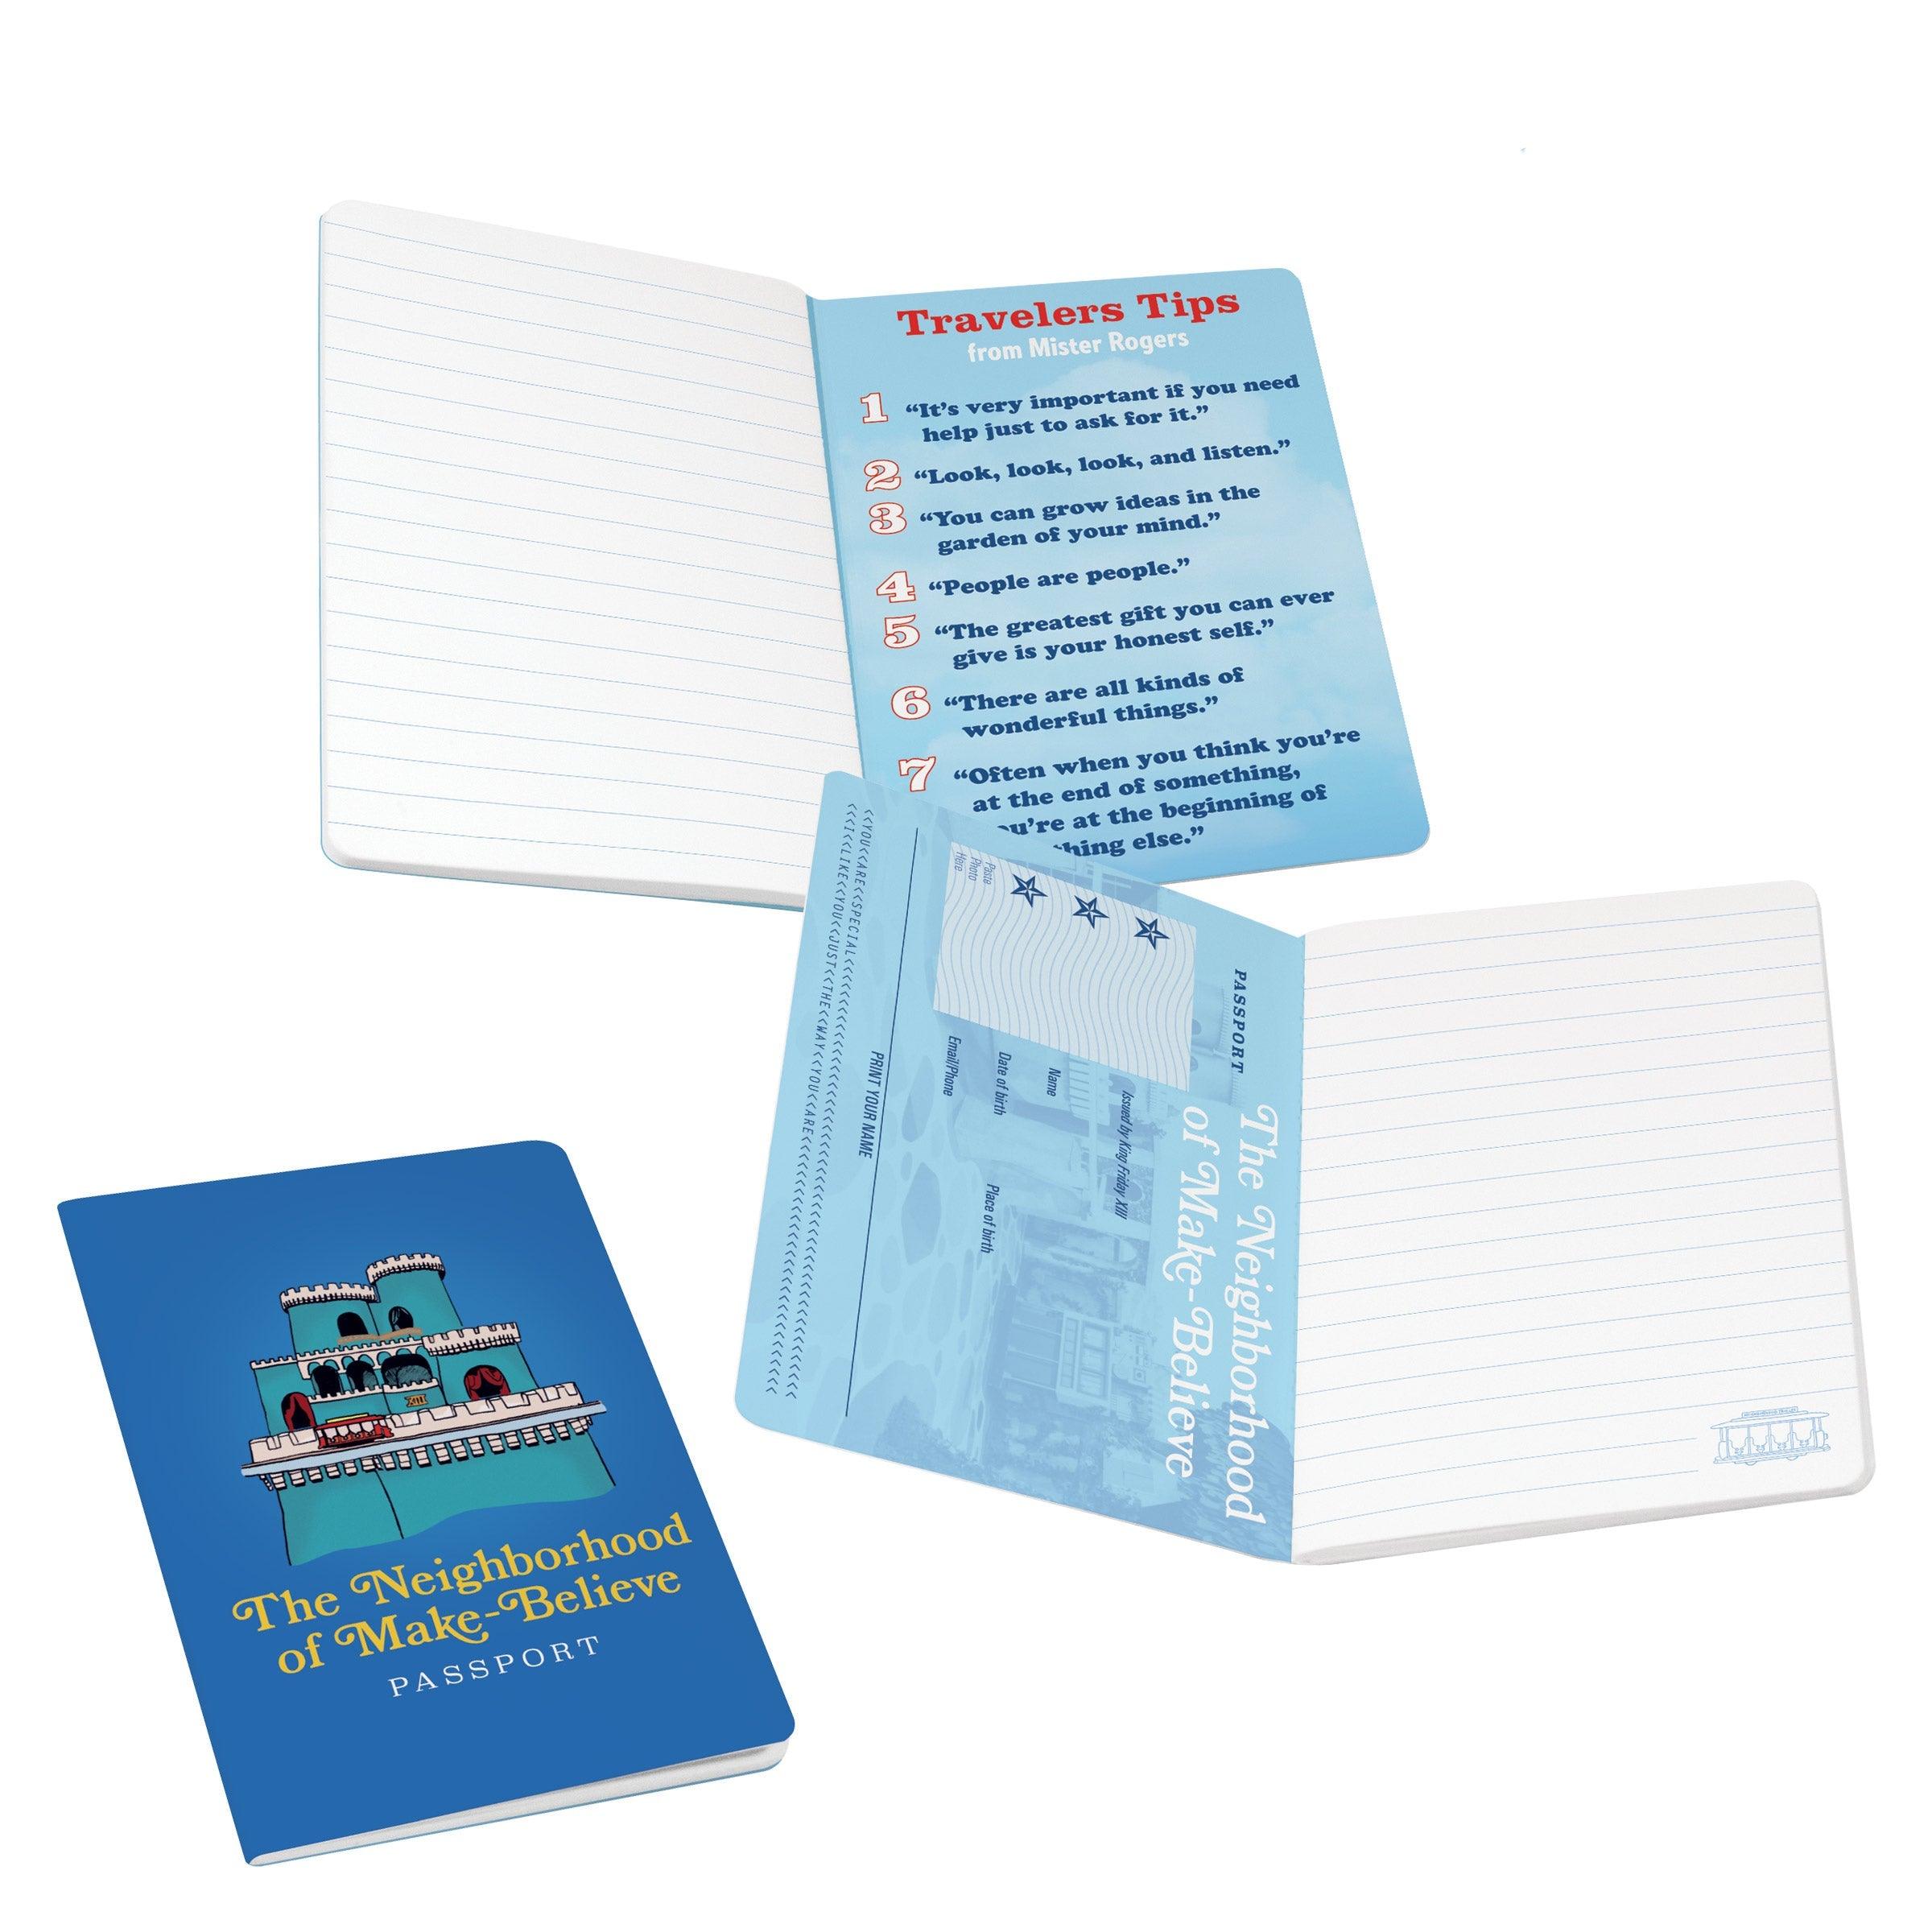 Product photo of Mister Rogers Passport Notebook, a novelty gift manufactured by The Unemployed Philosophers Guild.